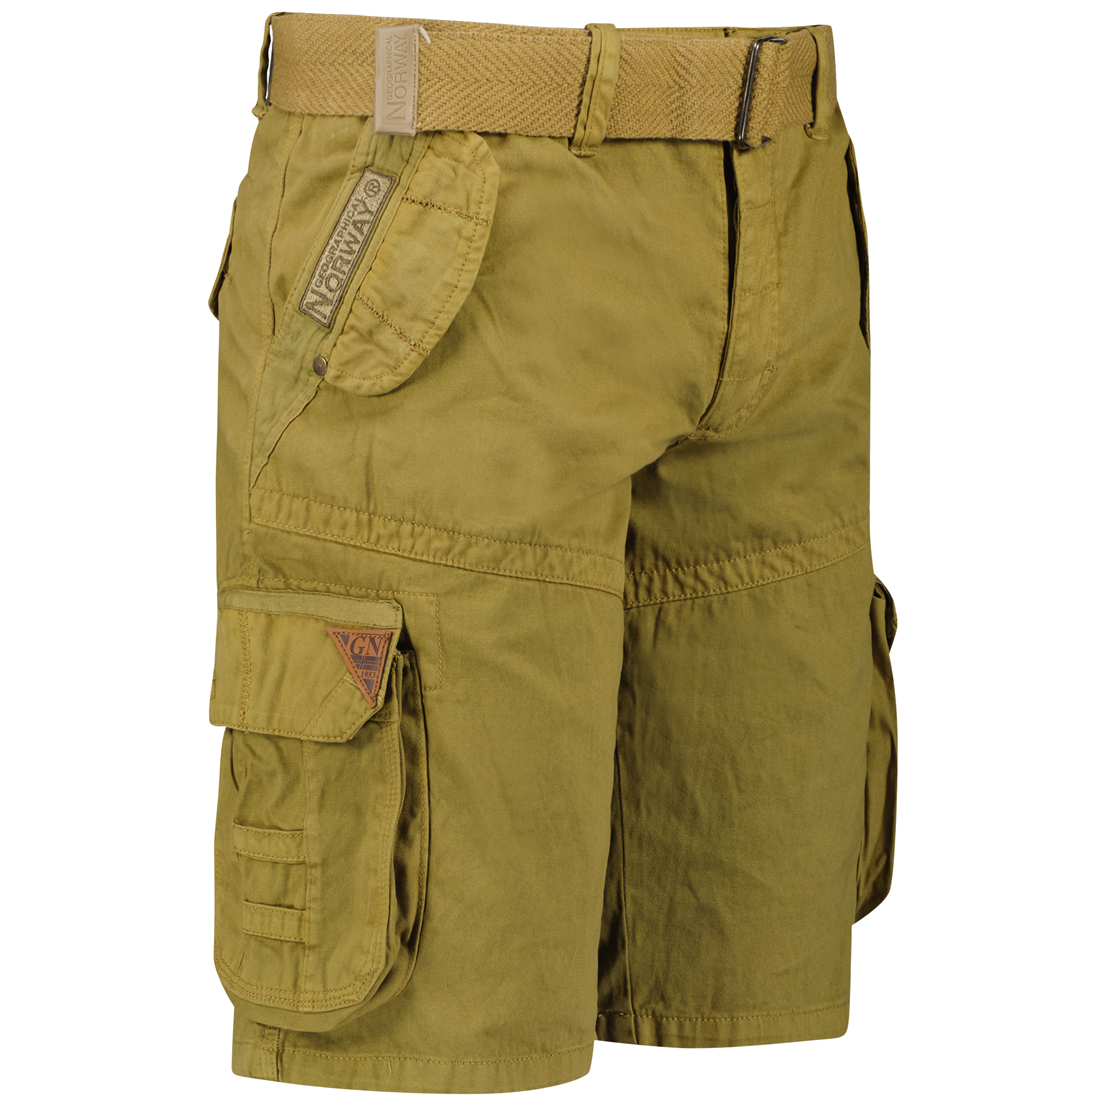 Cotton Shorts with Visible Logo and Multiple Pockets